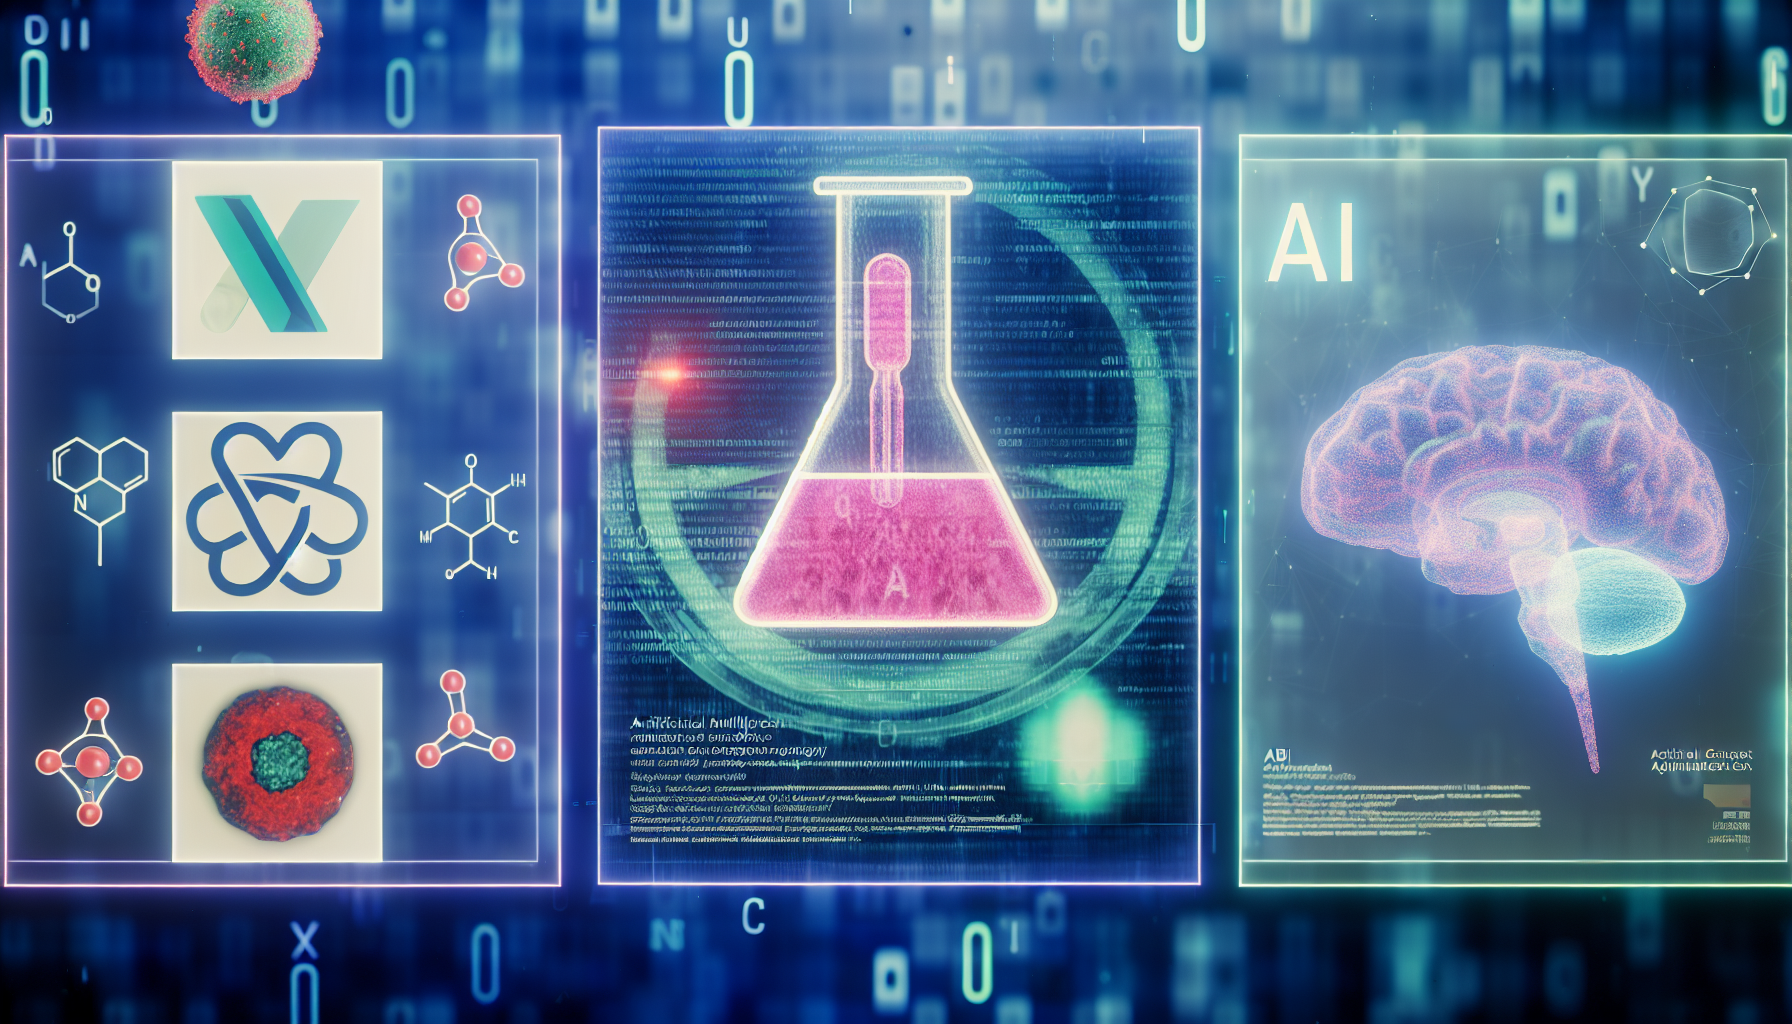 Absci, AstraZeneca Partner to Discover Cancer Treatments Using AI